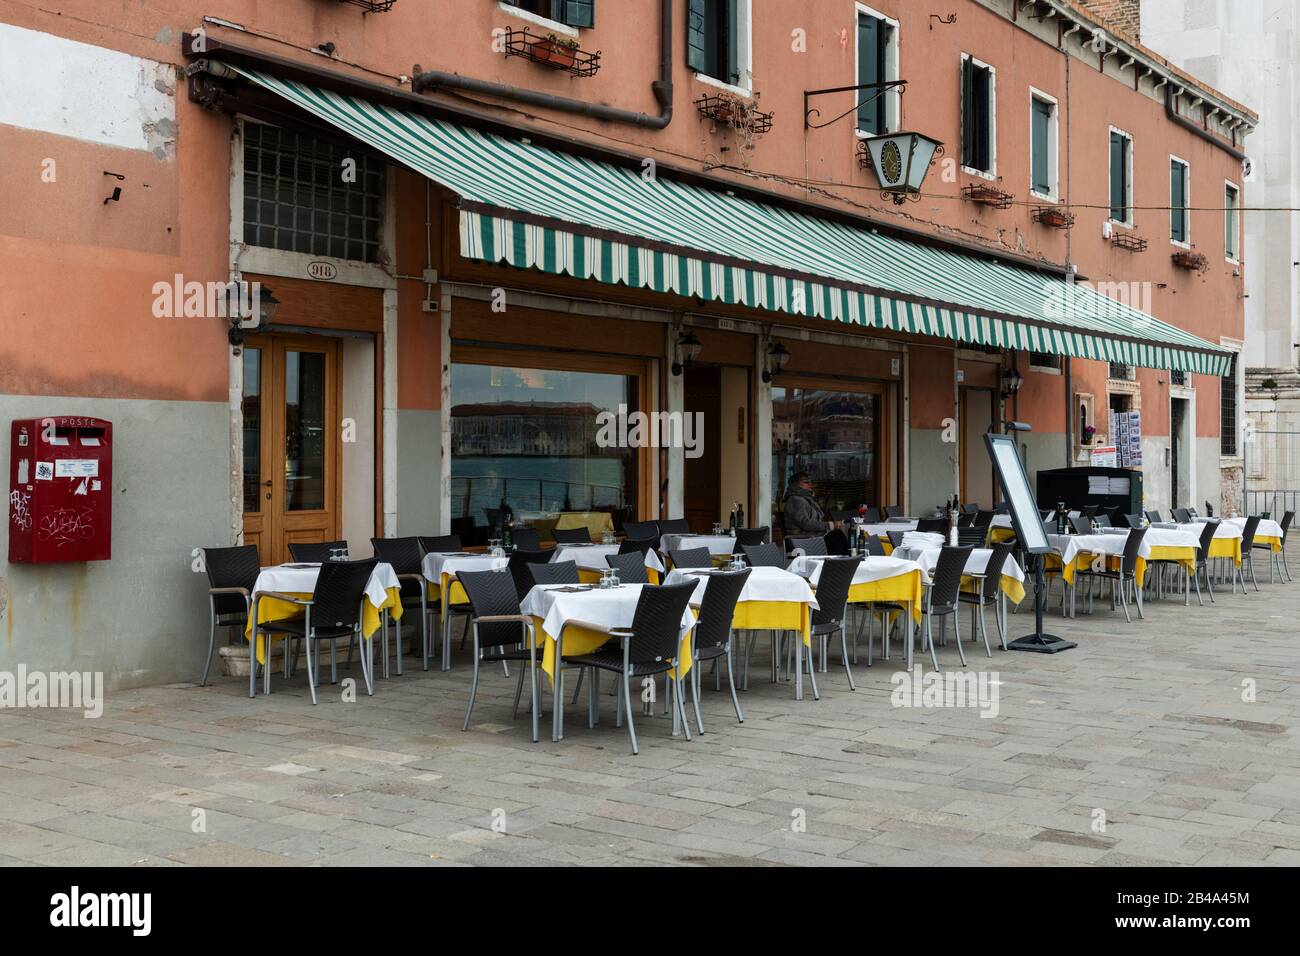 Venice, February 25th - March 3rd. 2020: Bars and restaurants  are suffering from a drastic drop in business as the Coronavirus epidemic scares tourist from visiting Vence and cancelling their trip. Restaurants and bars are laying off members of staff as trade has dropped off dramatically. Stock Photo